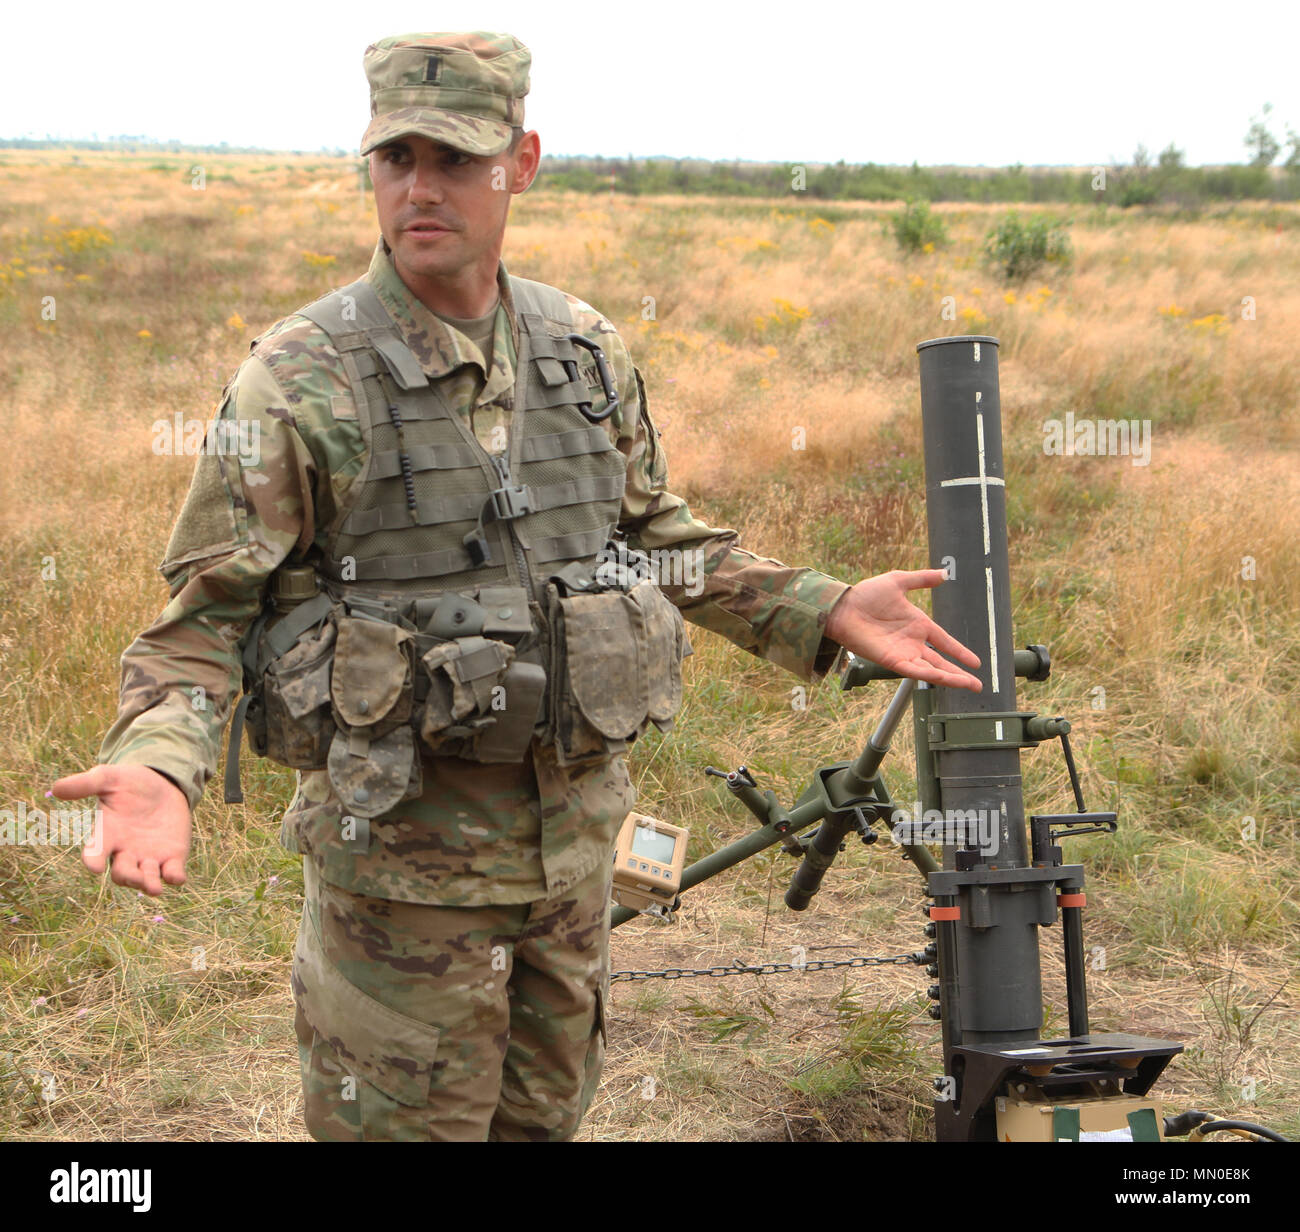 Arizona National Guard First Lieutenant Grant Buben explains how a 120  millileter mortar operates as part of Operation Northern Strike 17 in  Grayling, Michigan August 3, 2017. Northern Strike 17 is a